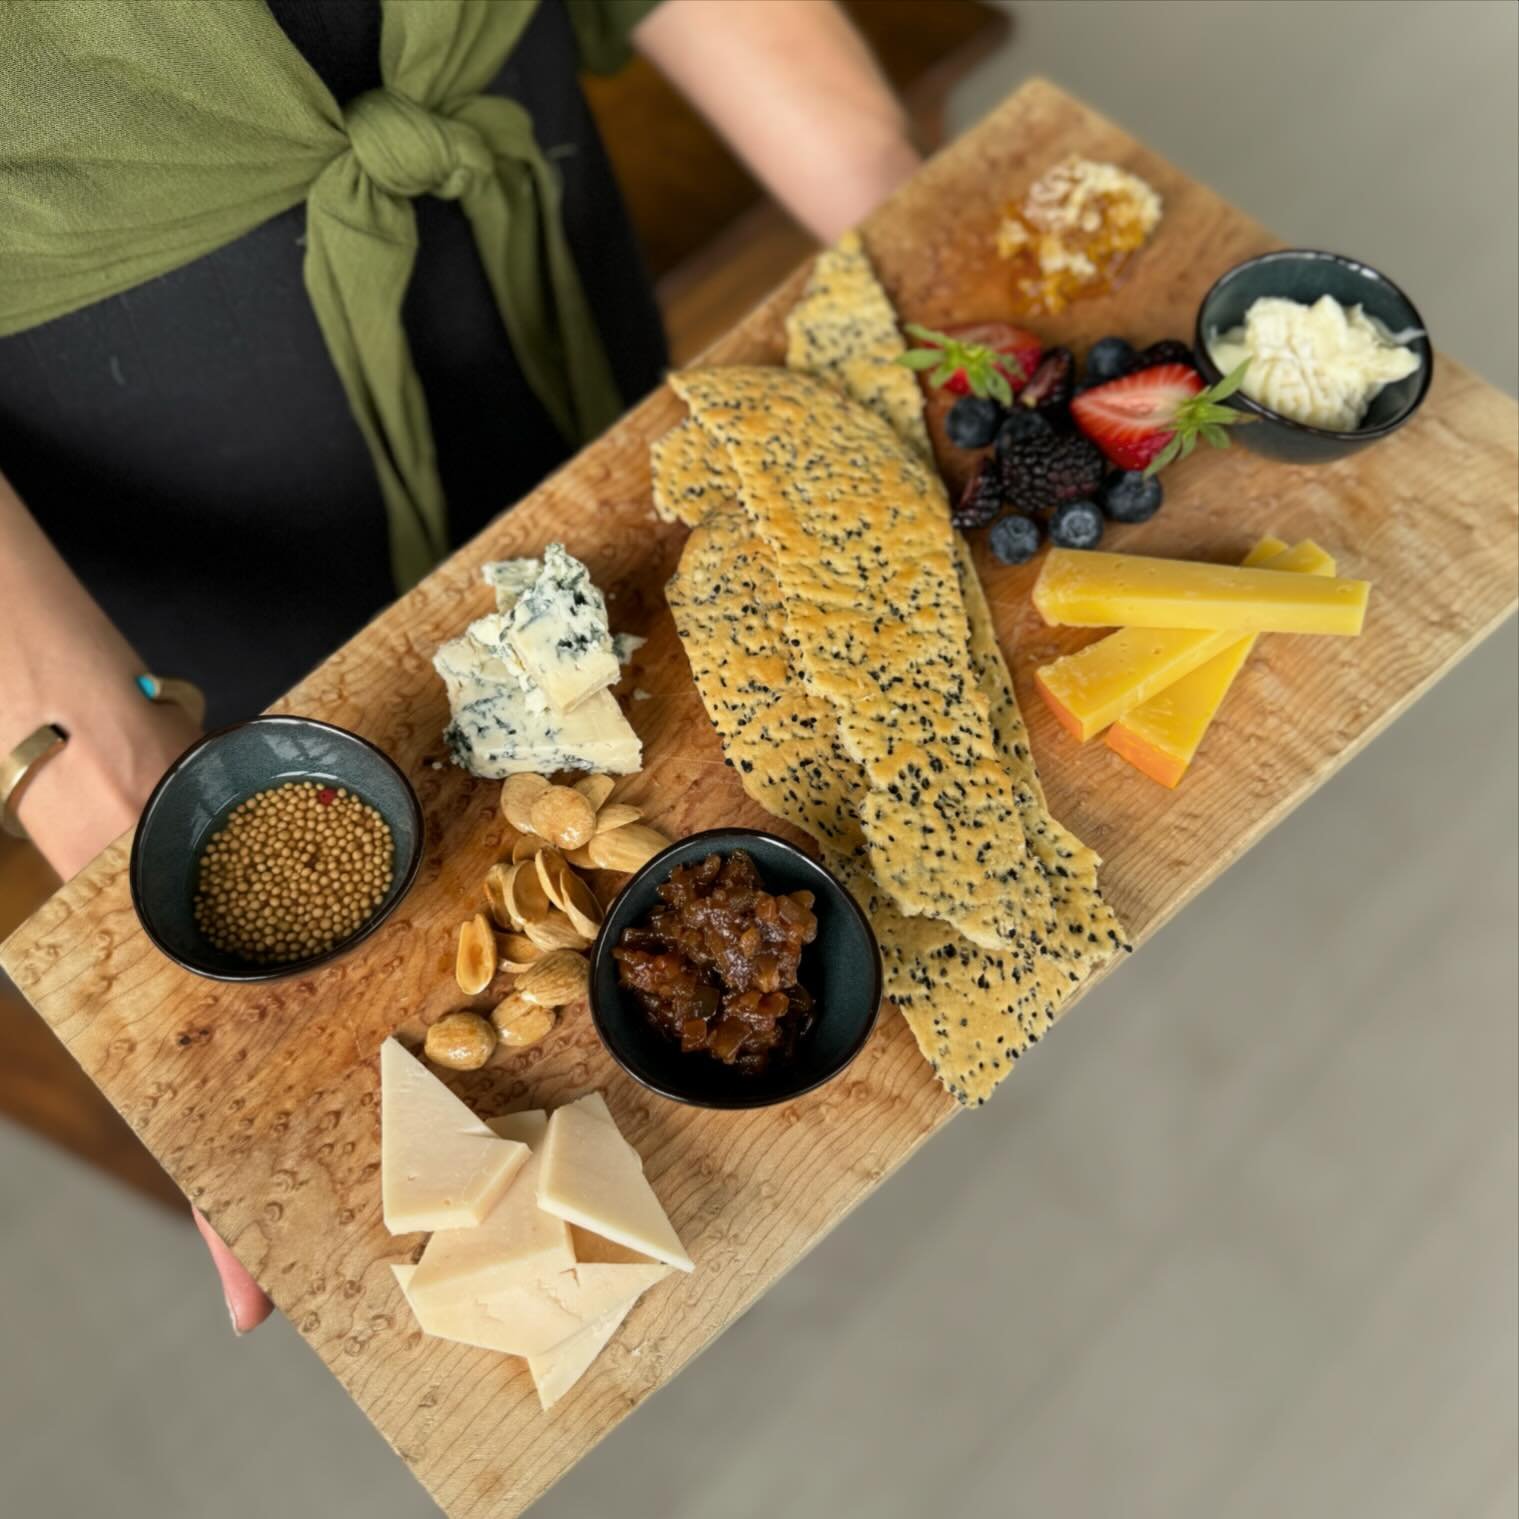 Did you know that our new &agrave; la carte menu has a shareable section now? Our beautiful cheeseboard is the perfect way to sit back, relax, and enjoy this beautiful sunshine on the patio tonight!